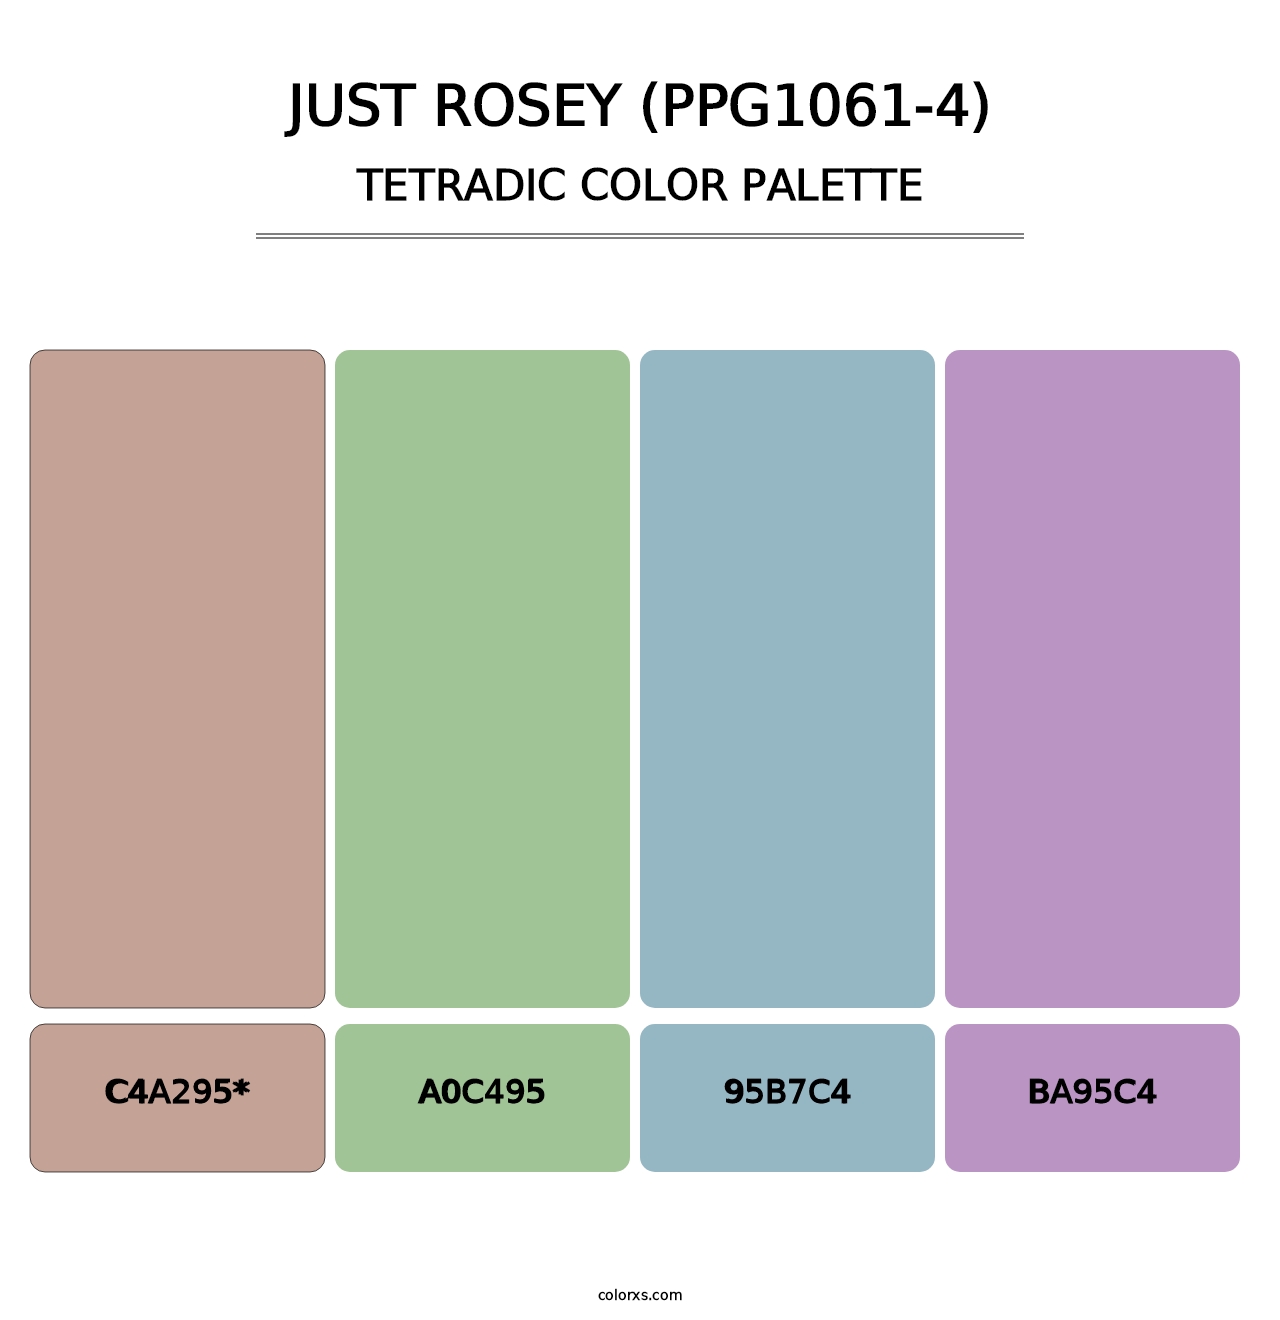 Just Rosey (PPG1061-4) - Tetradic Color Palette